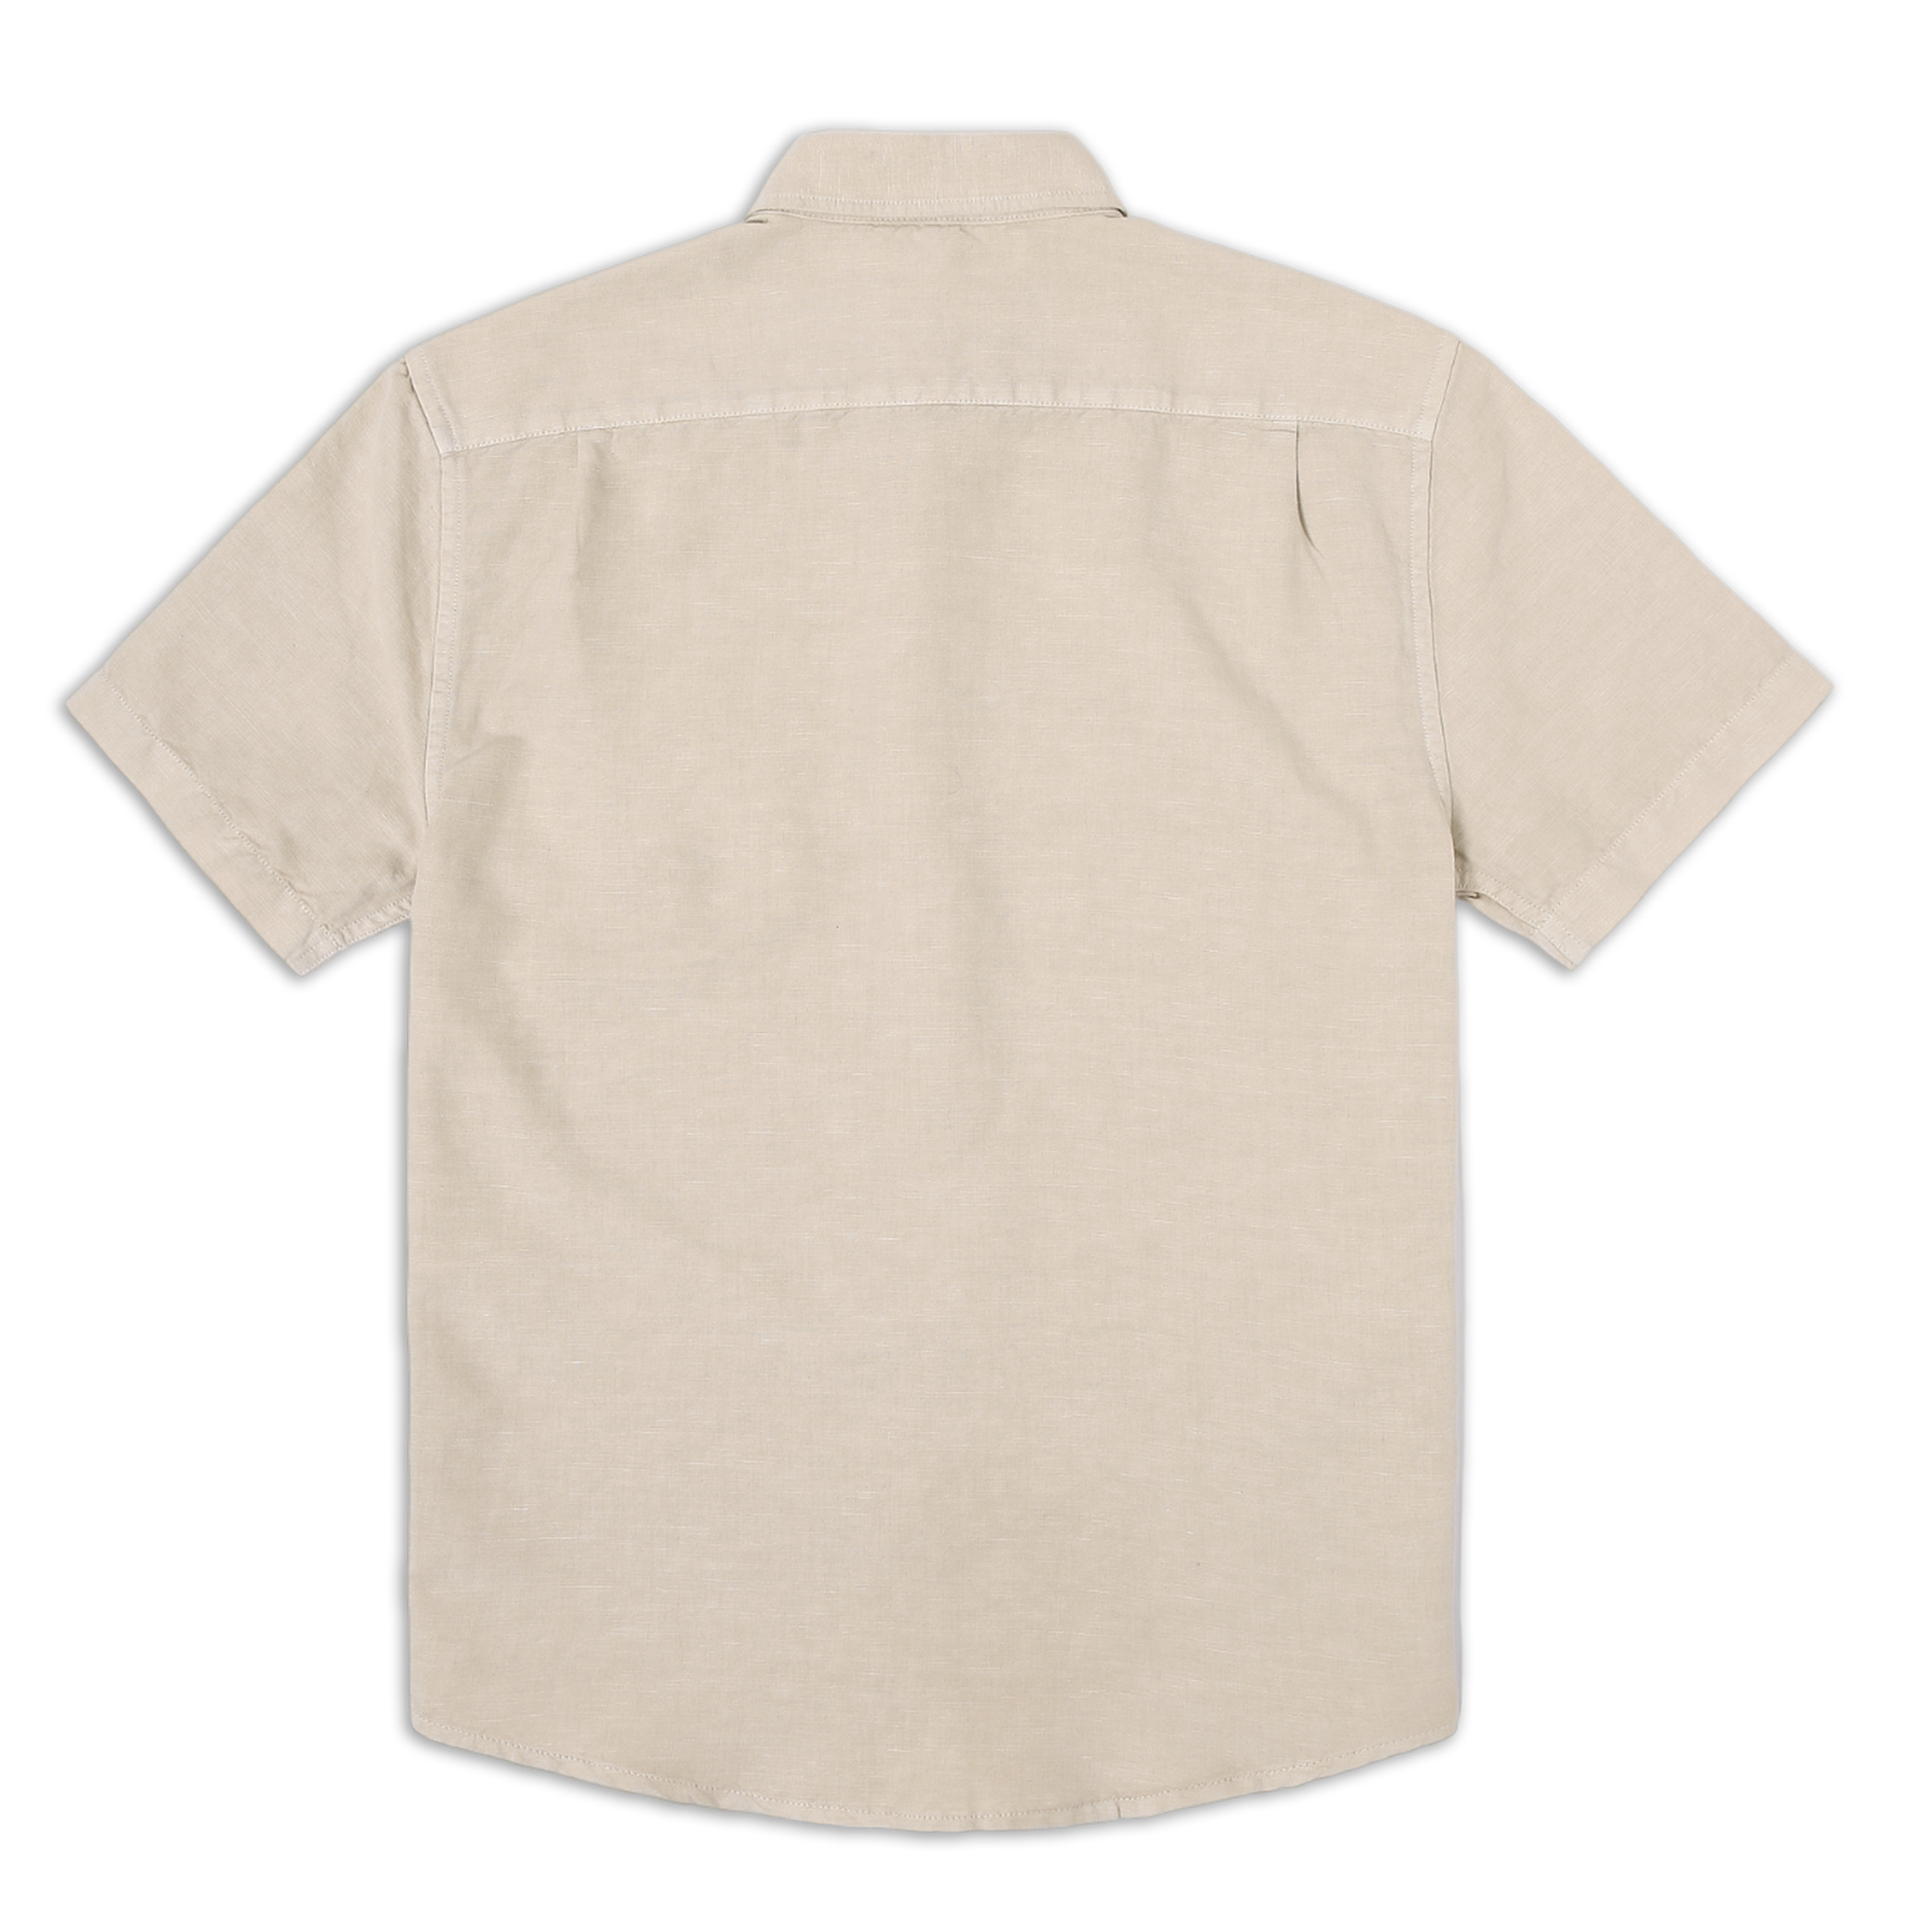 Retreat Linen Shirt Beige back with short sleeves and collar